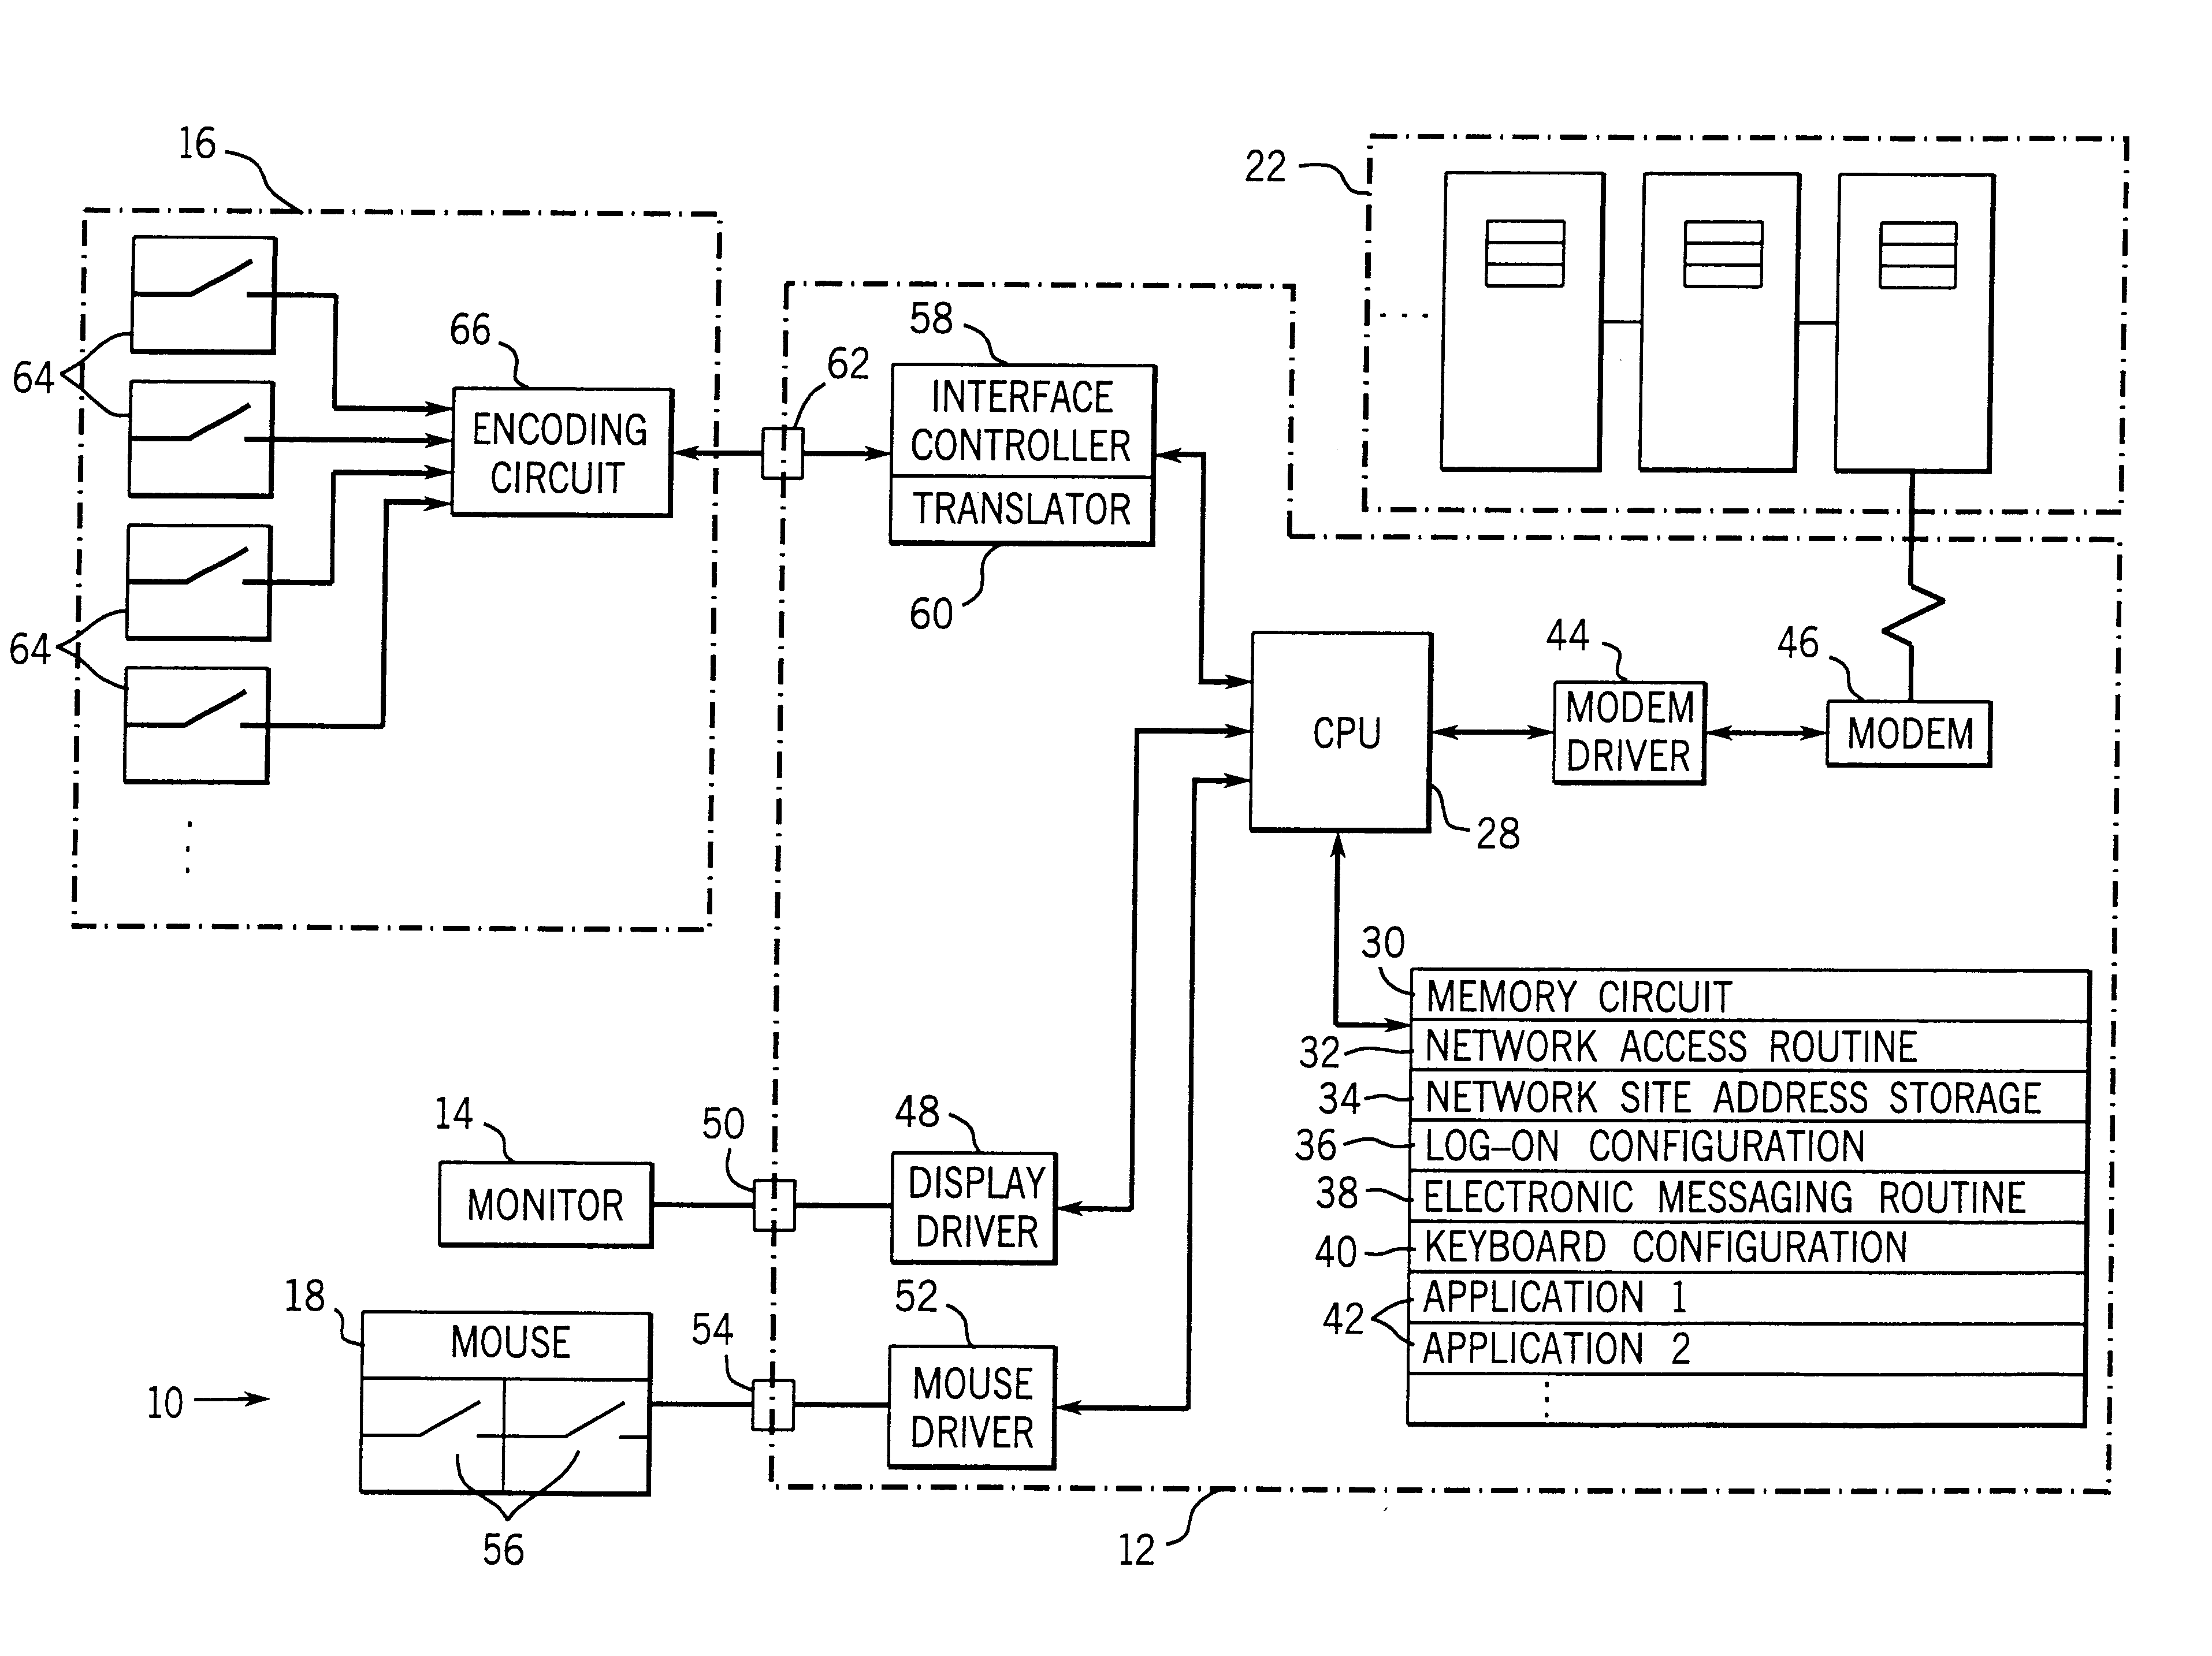 Rapid network access computer system